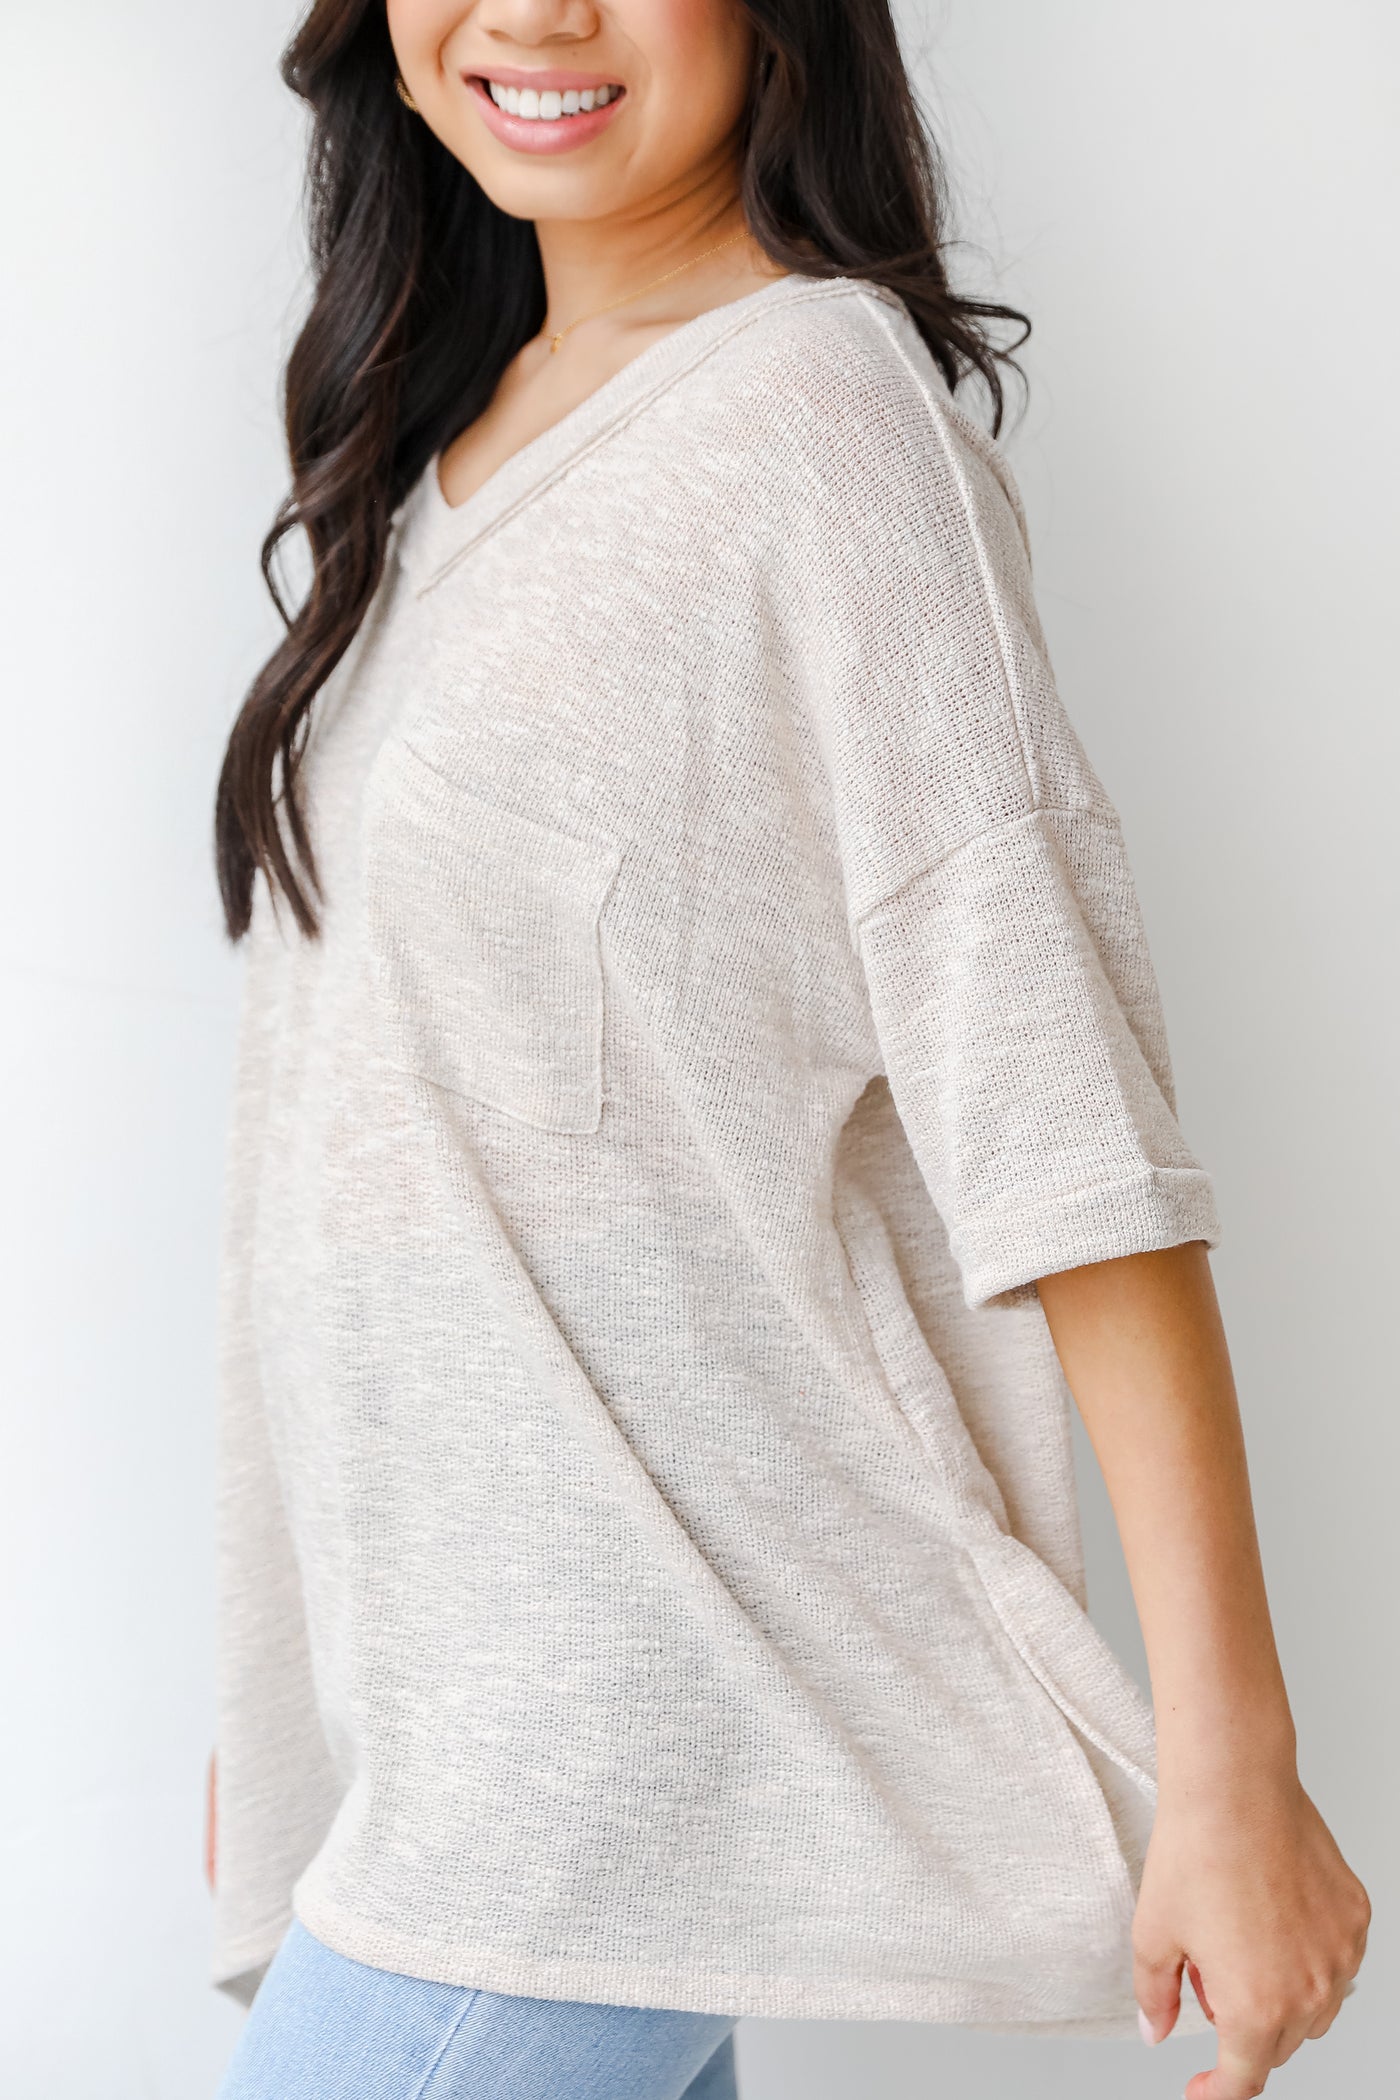 Knit Top in ivory side view